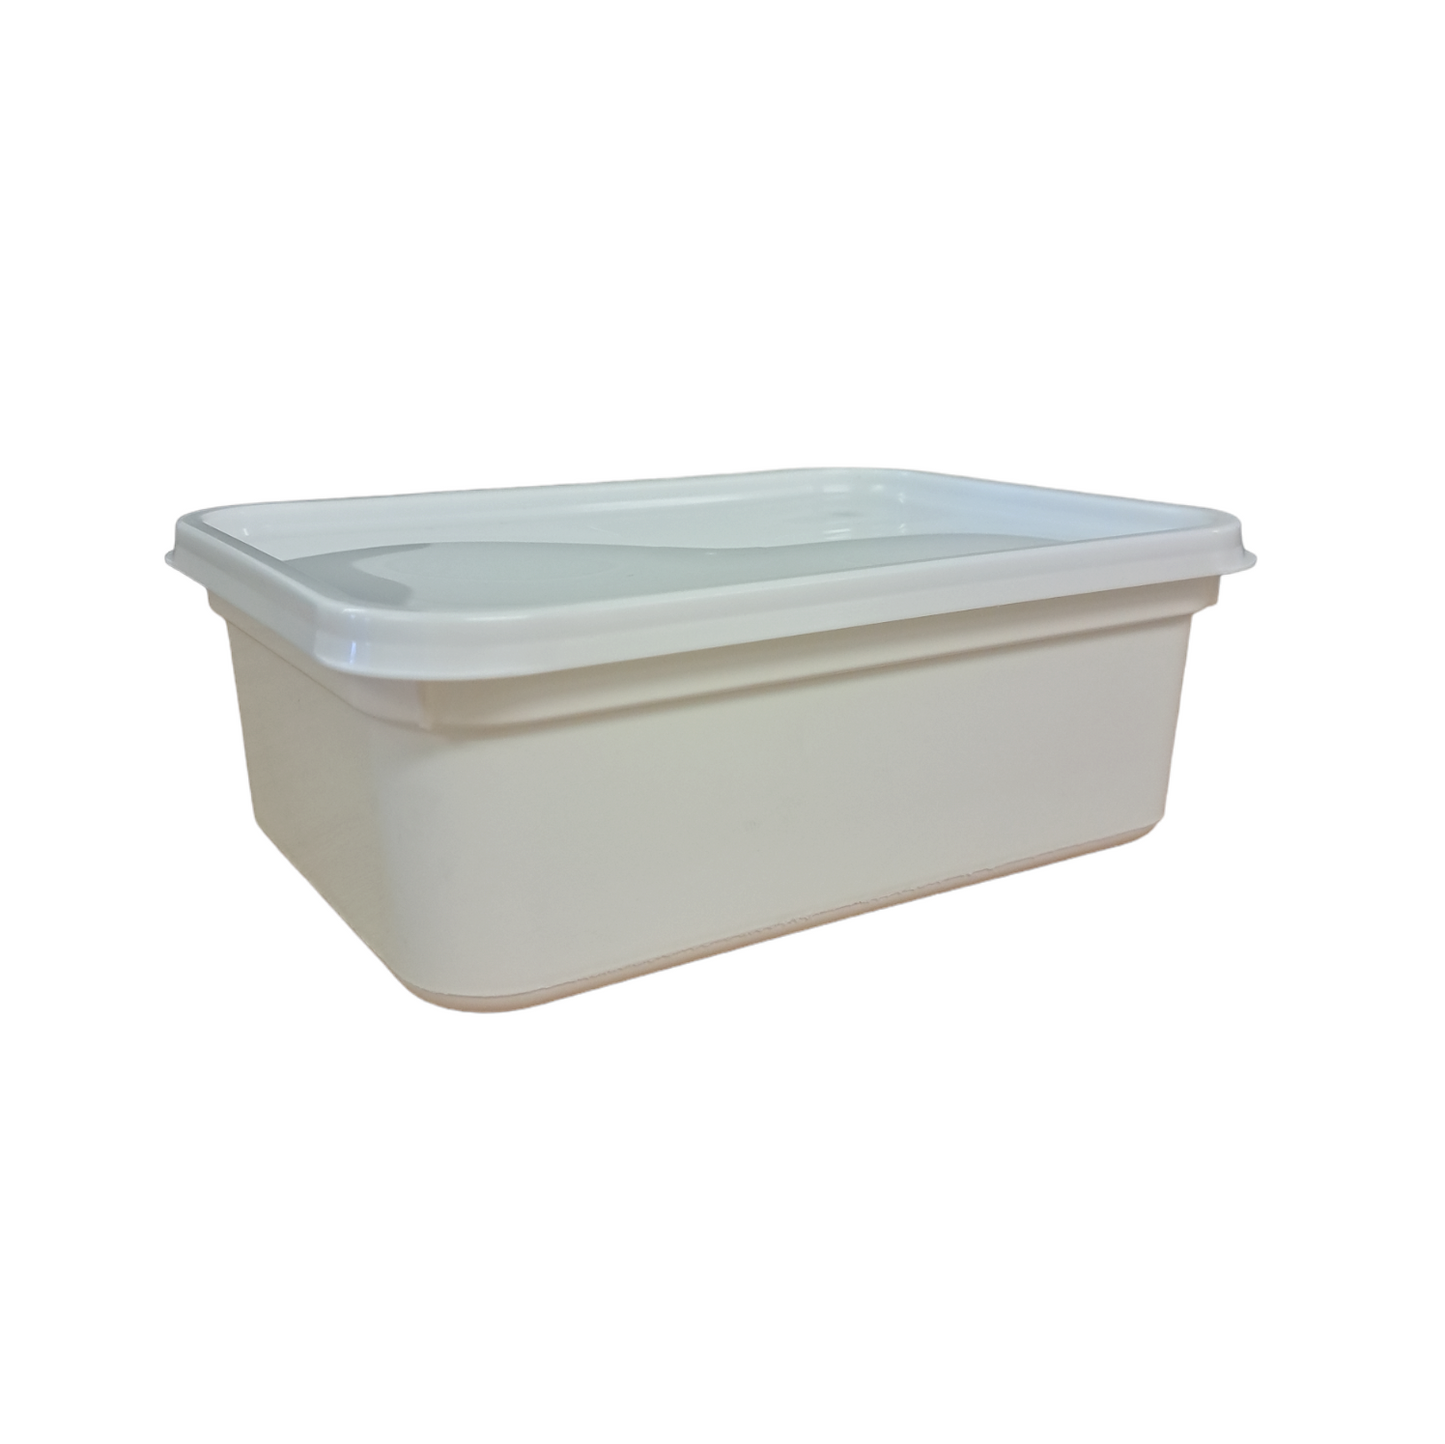 2 litre rectangle standard container & lid